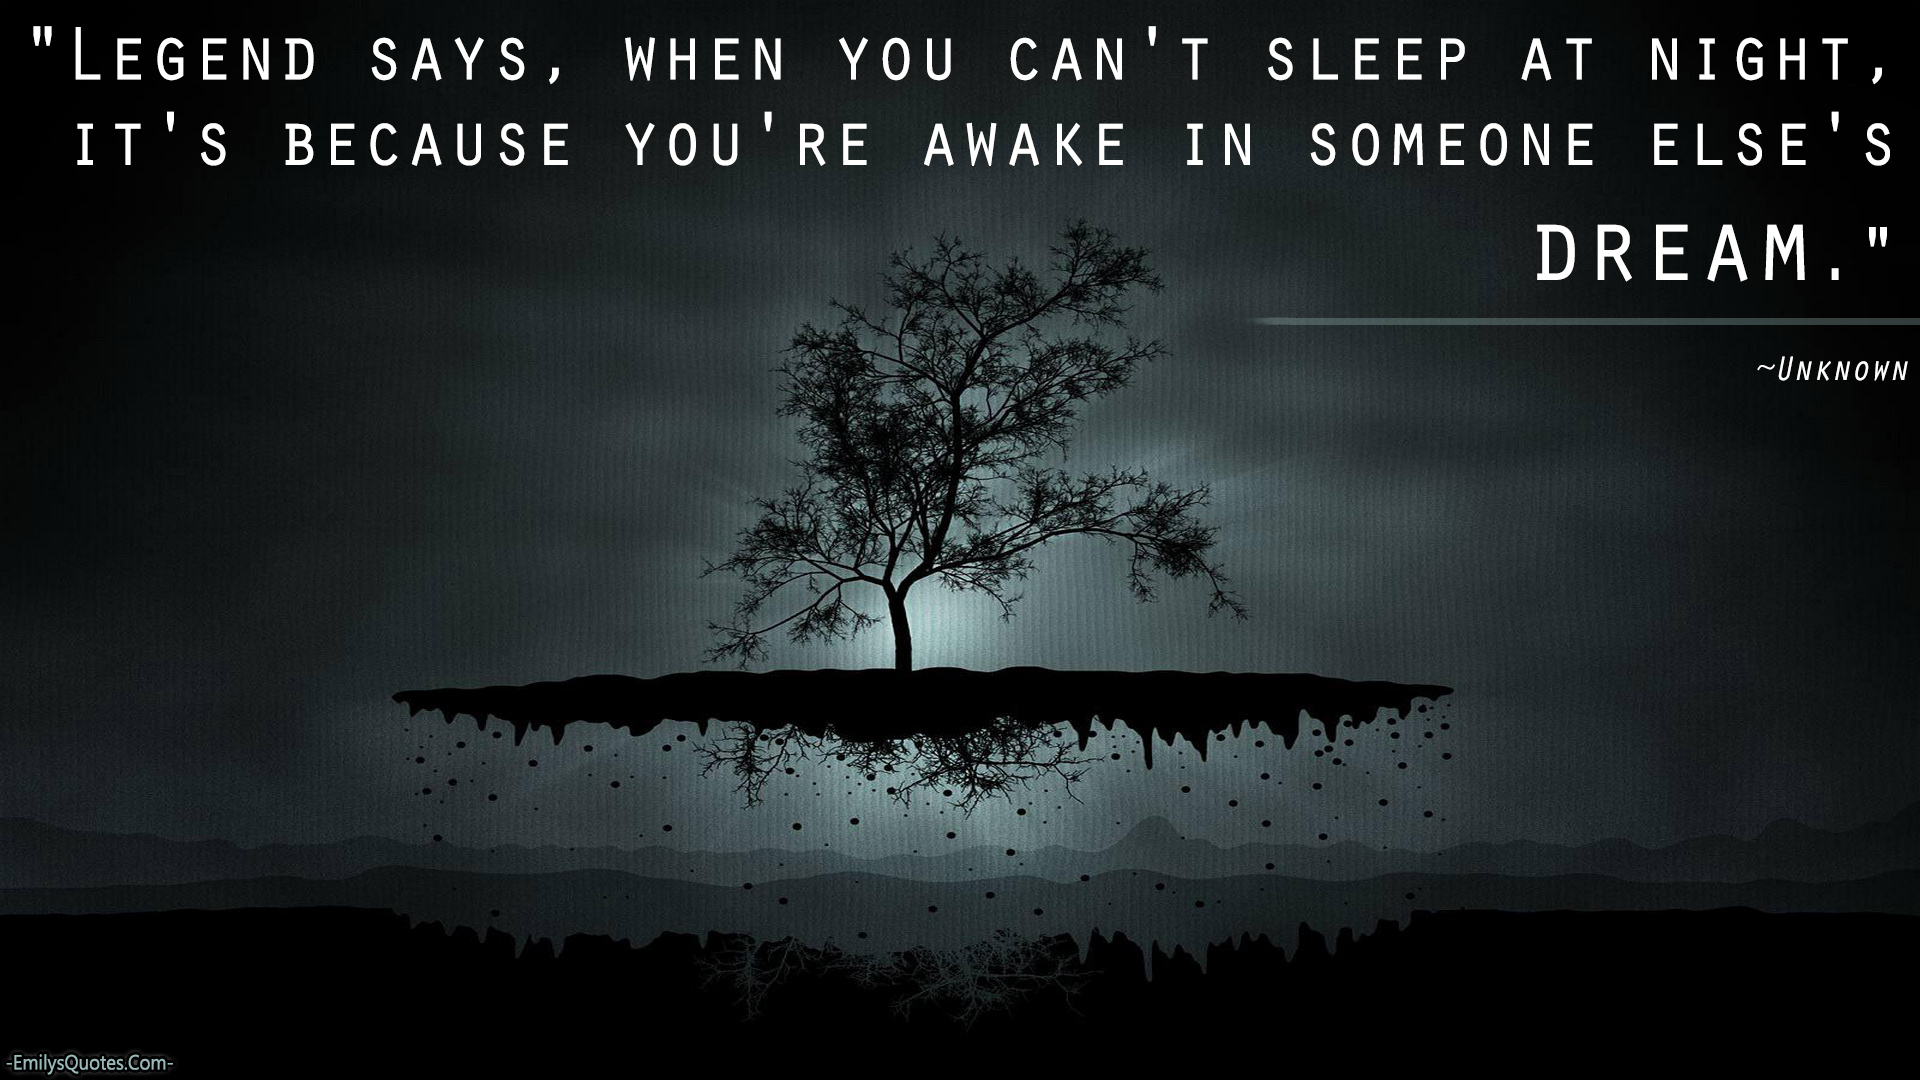 Legend says, when you can't sleep at night, it's because you're awake in someone else's dream